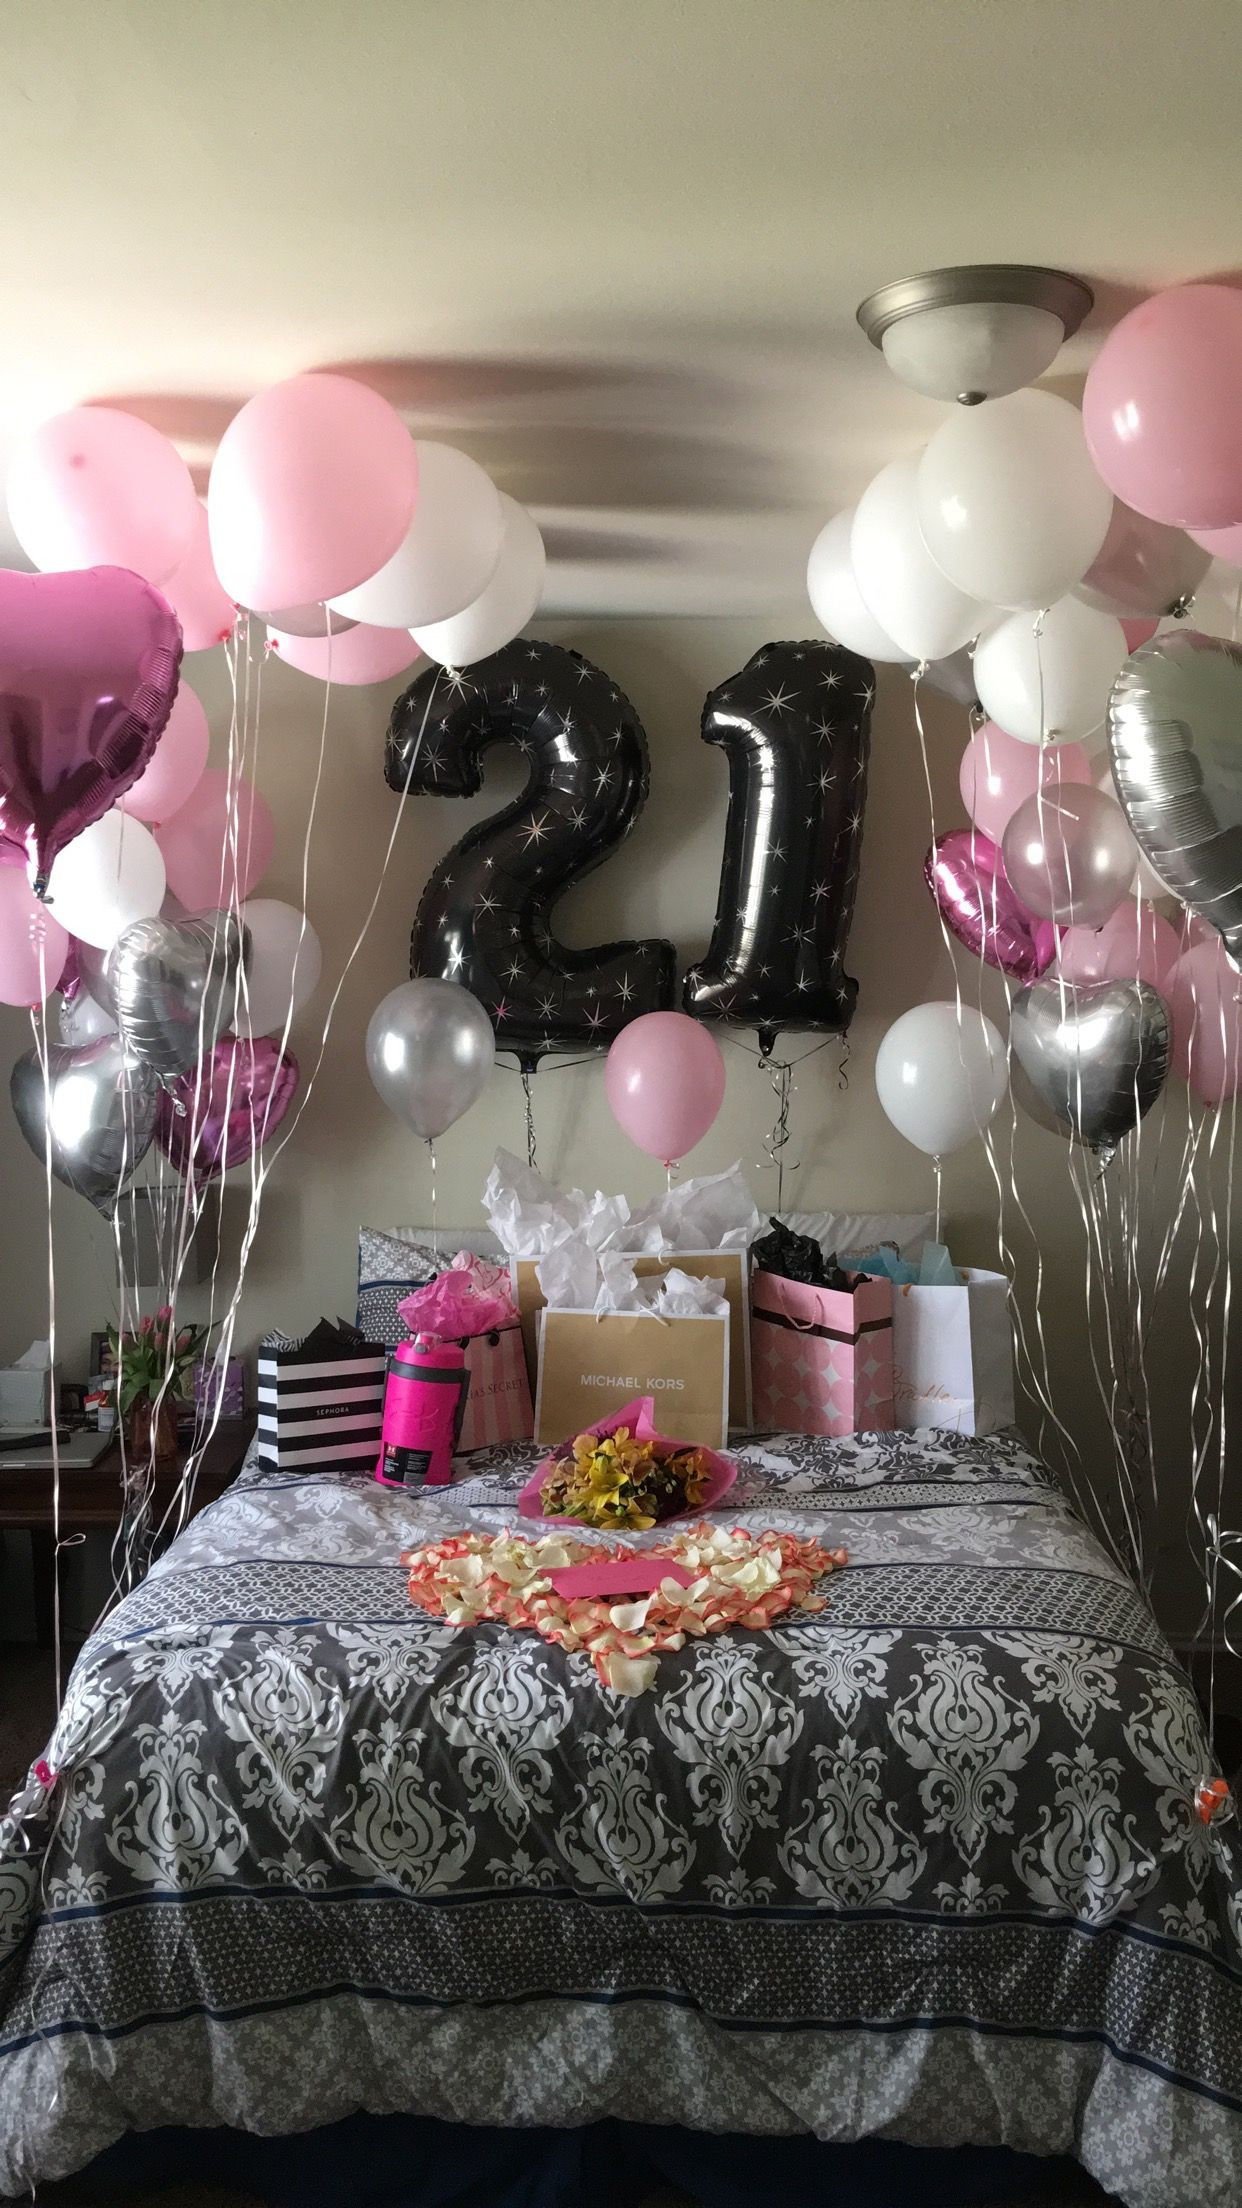 the-20-best-ideas-for-birthday-gift-ideas-for-my-girlfriend-home